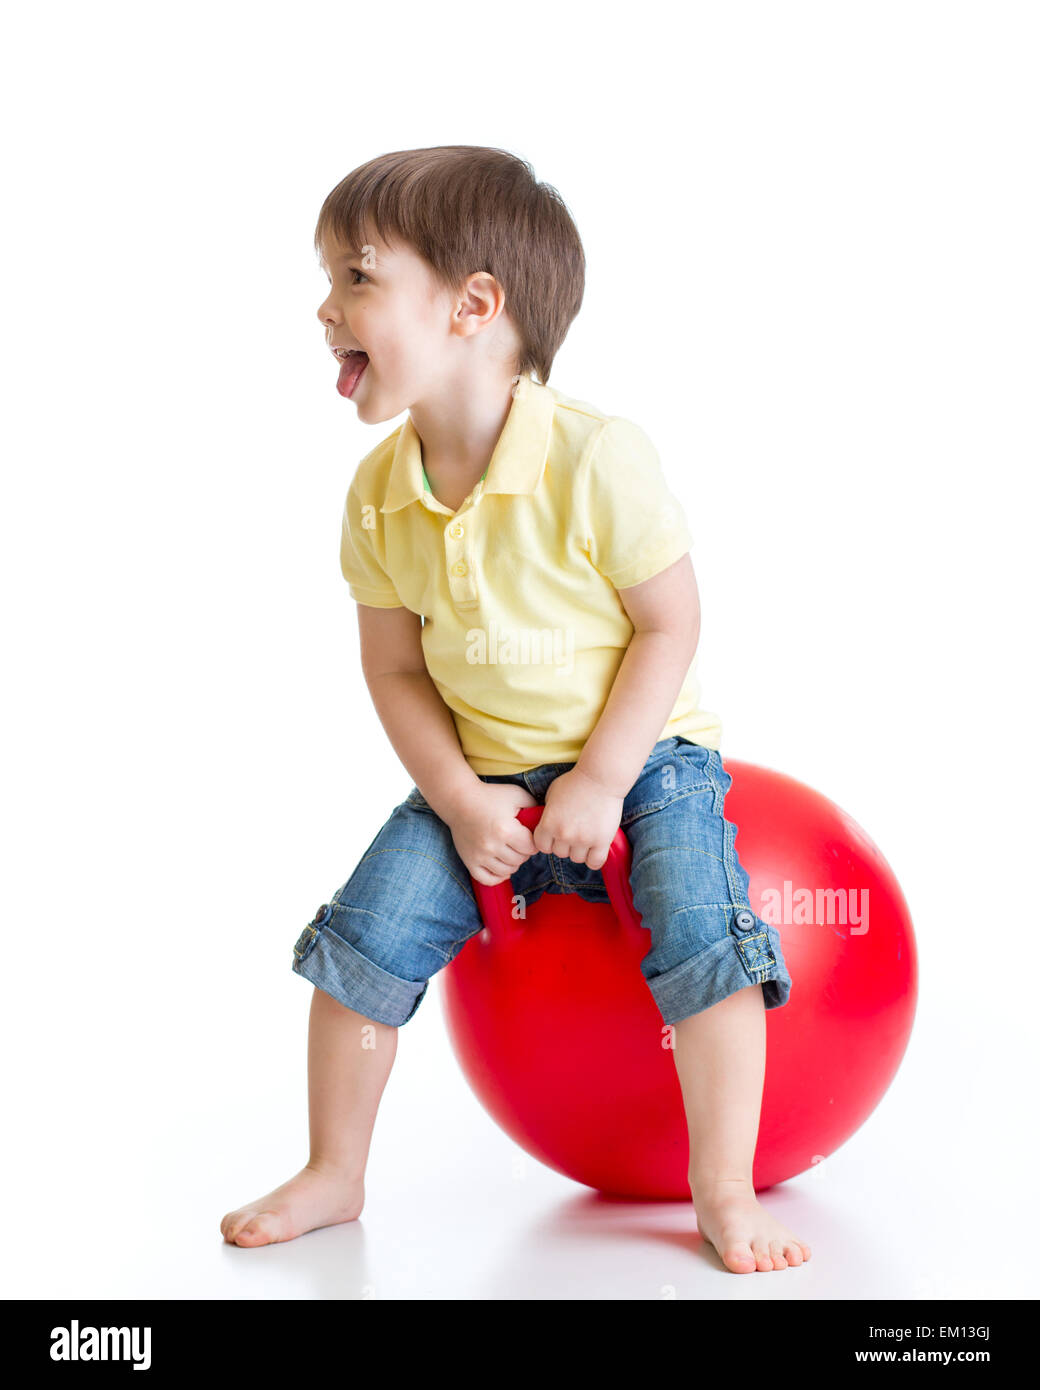 happy child jumping on bouncing ball Stock Photo - Alamy